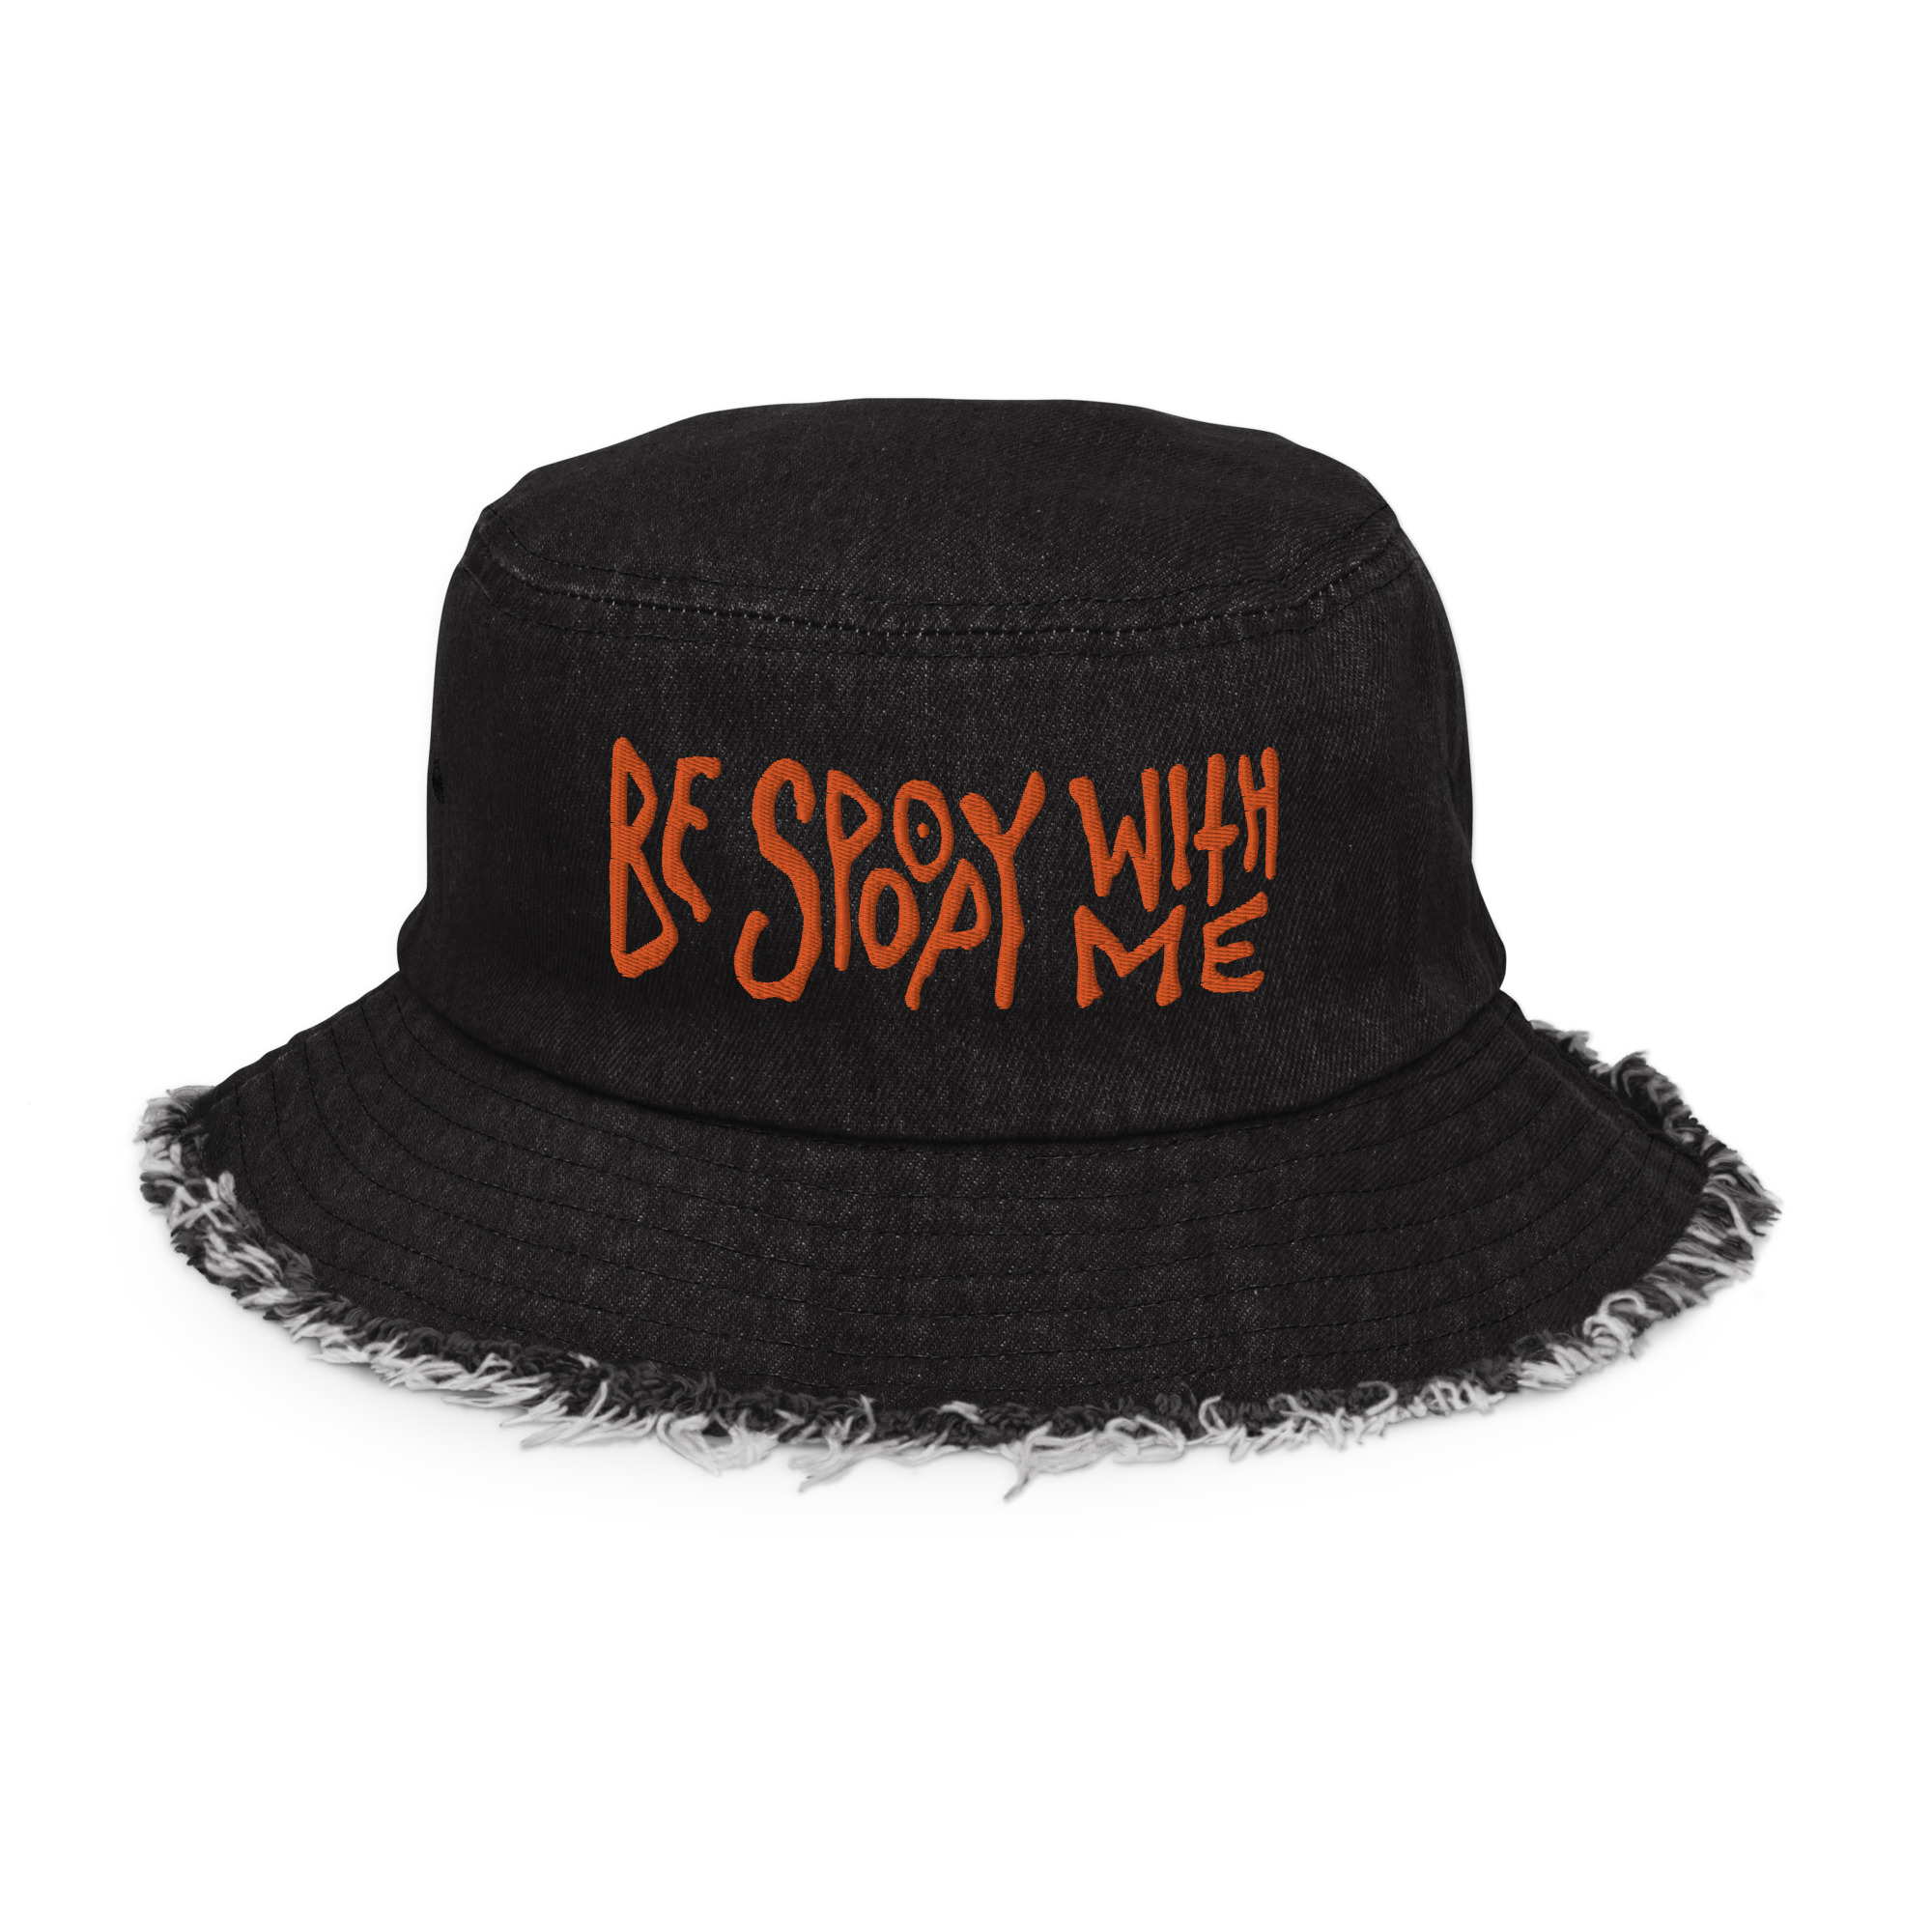 Featured image for “Be Spoopy with me - Distressed denim bucket hat”